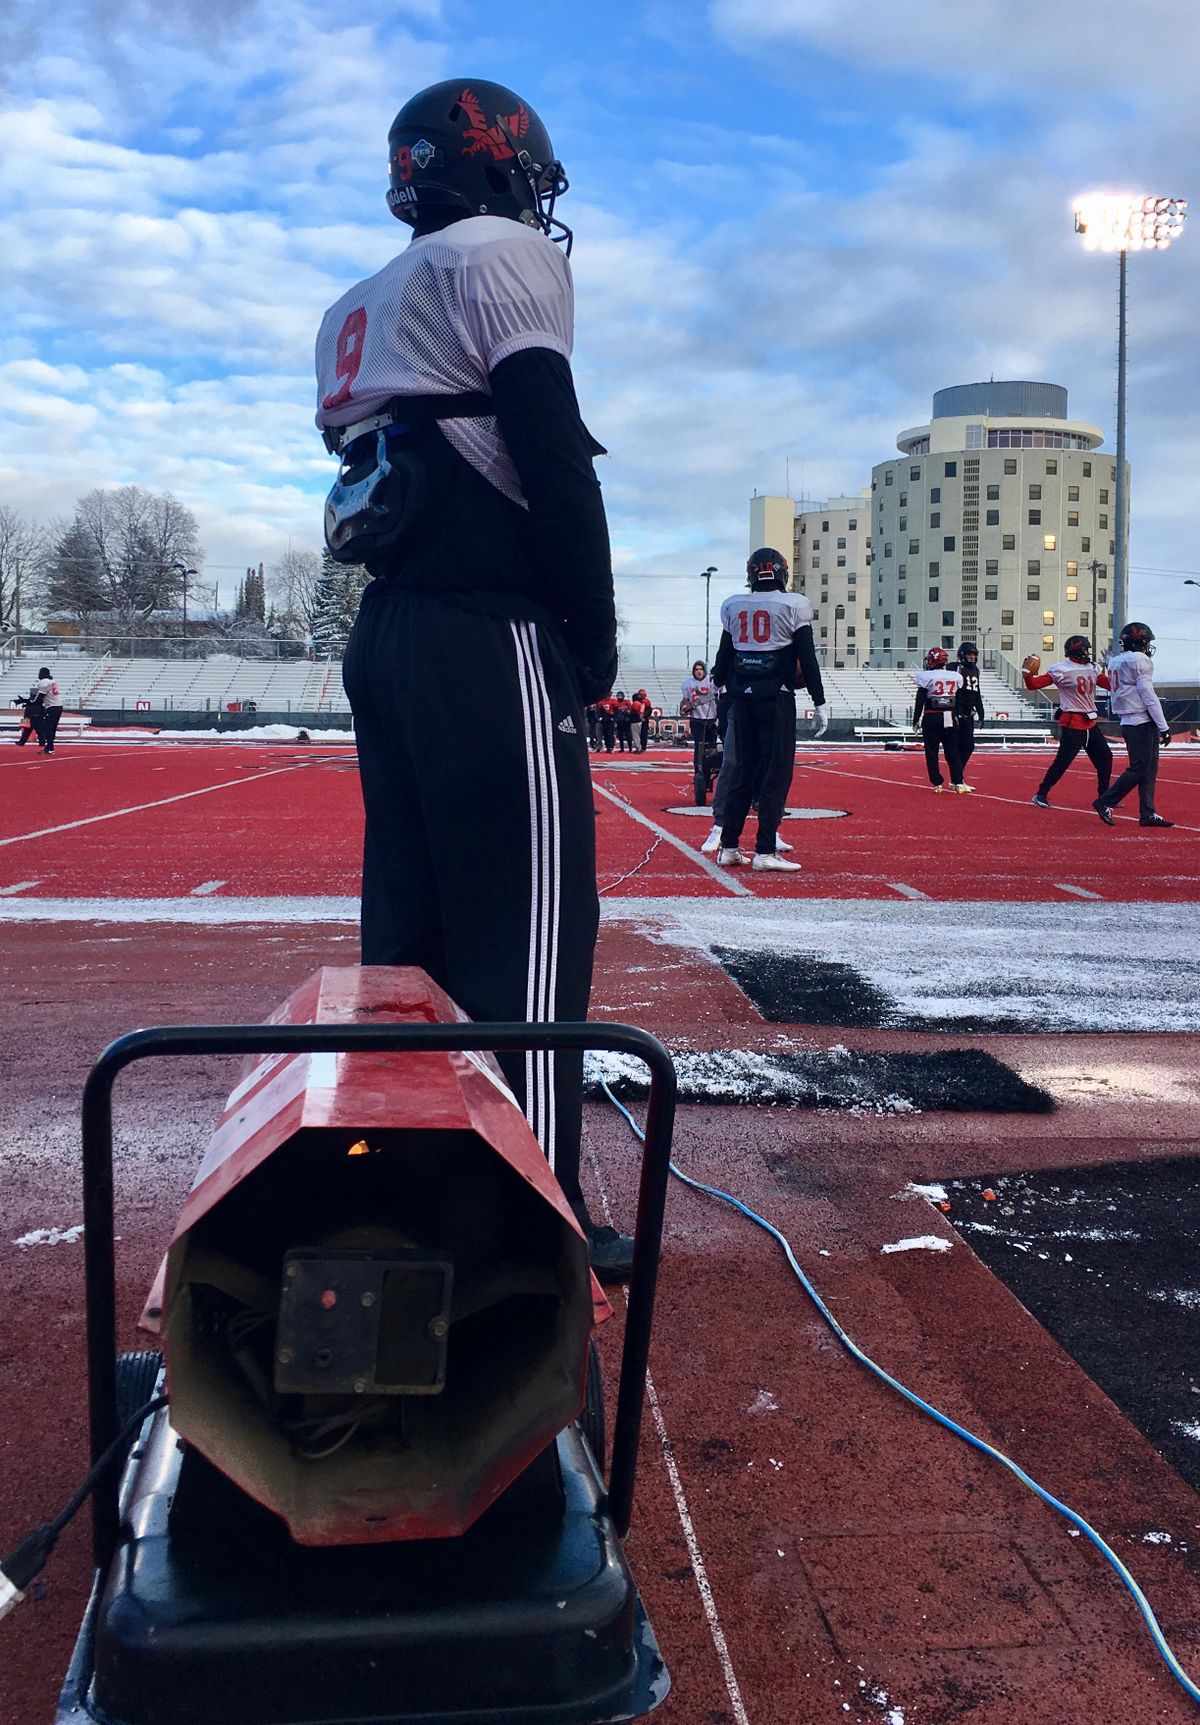 Heaters are on the sidelines for EWU practices, but few players take advantage of them. (Jim Allen / The Spokesman-Review)